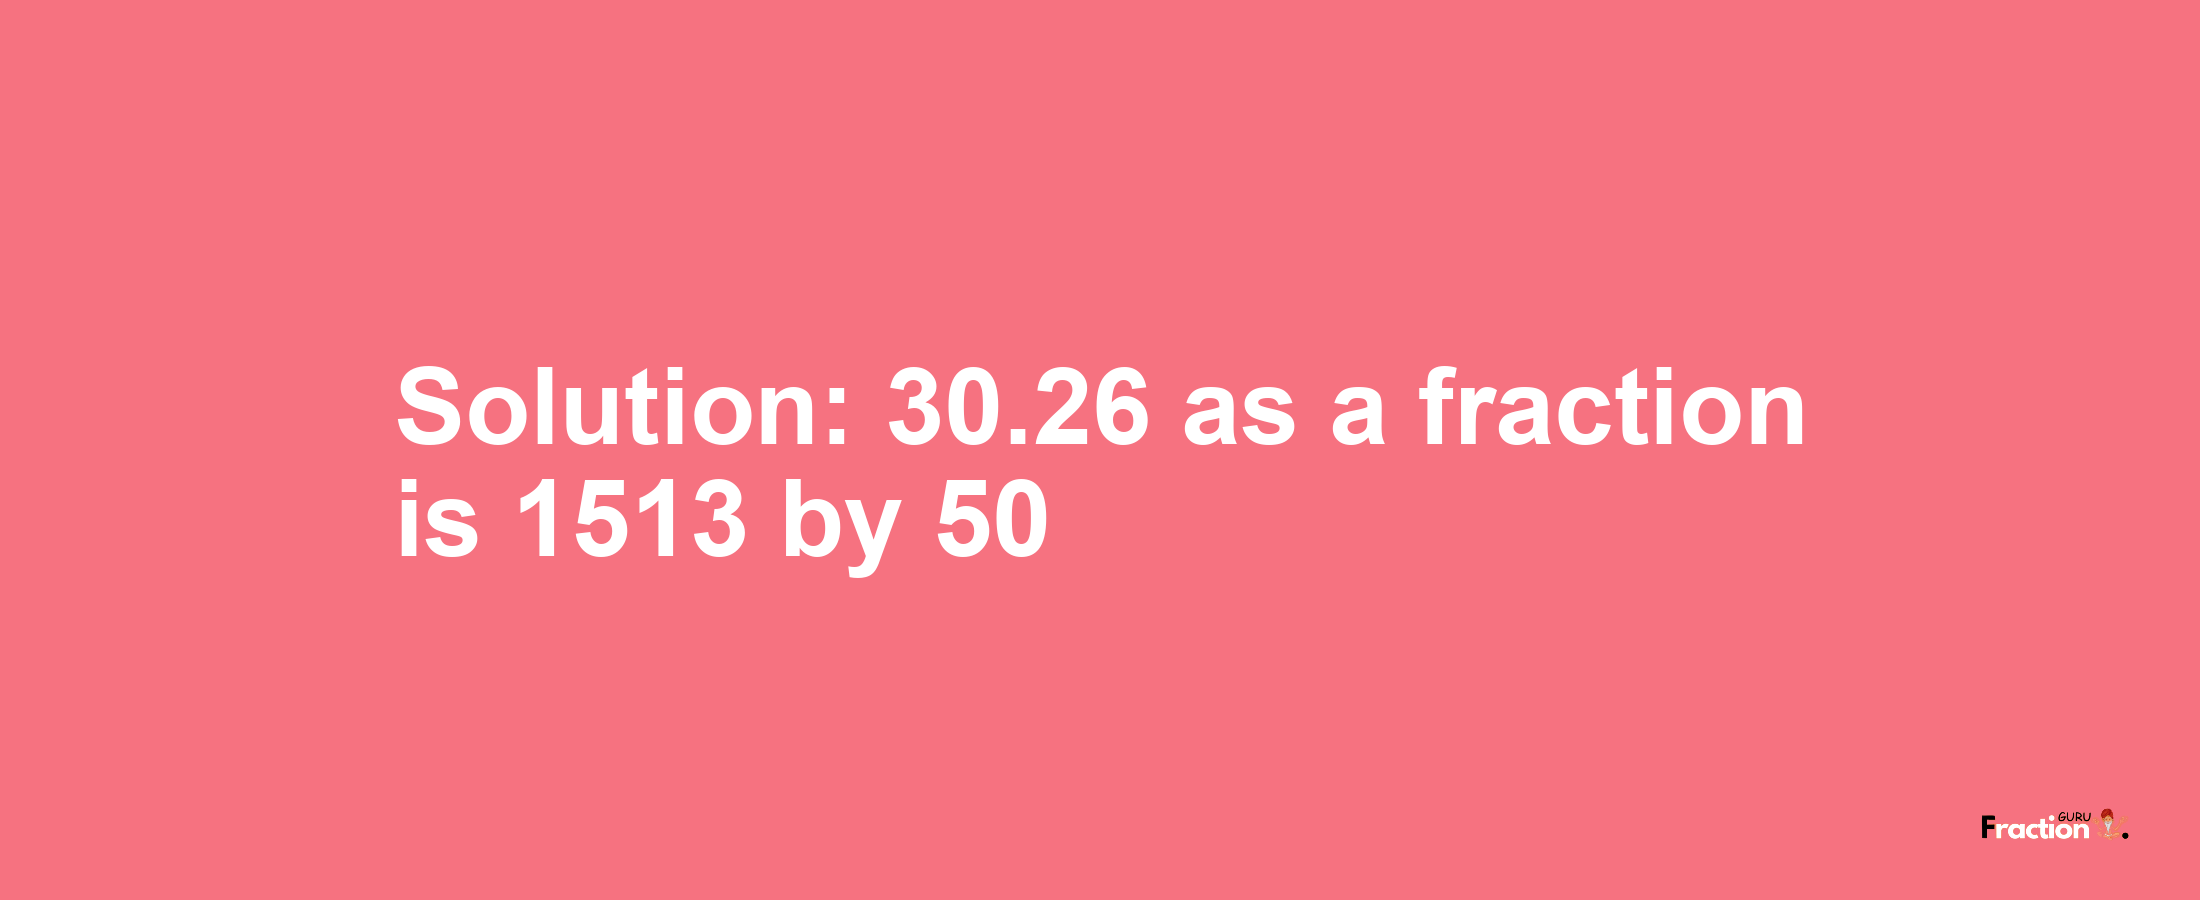 Solution:30.26 as a fraction is 1513/50